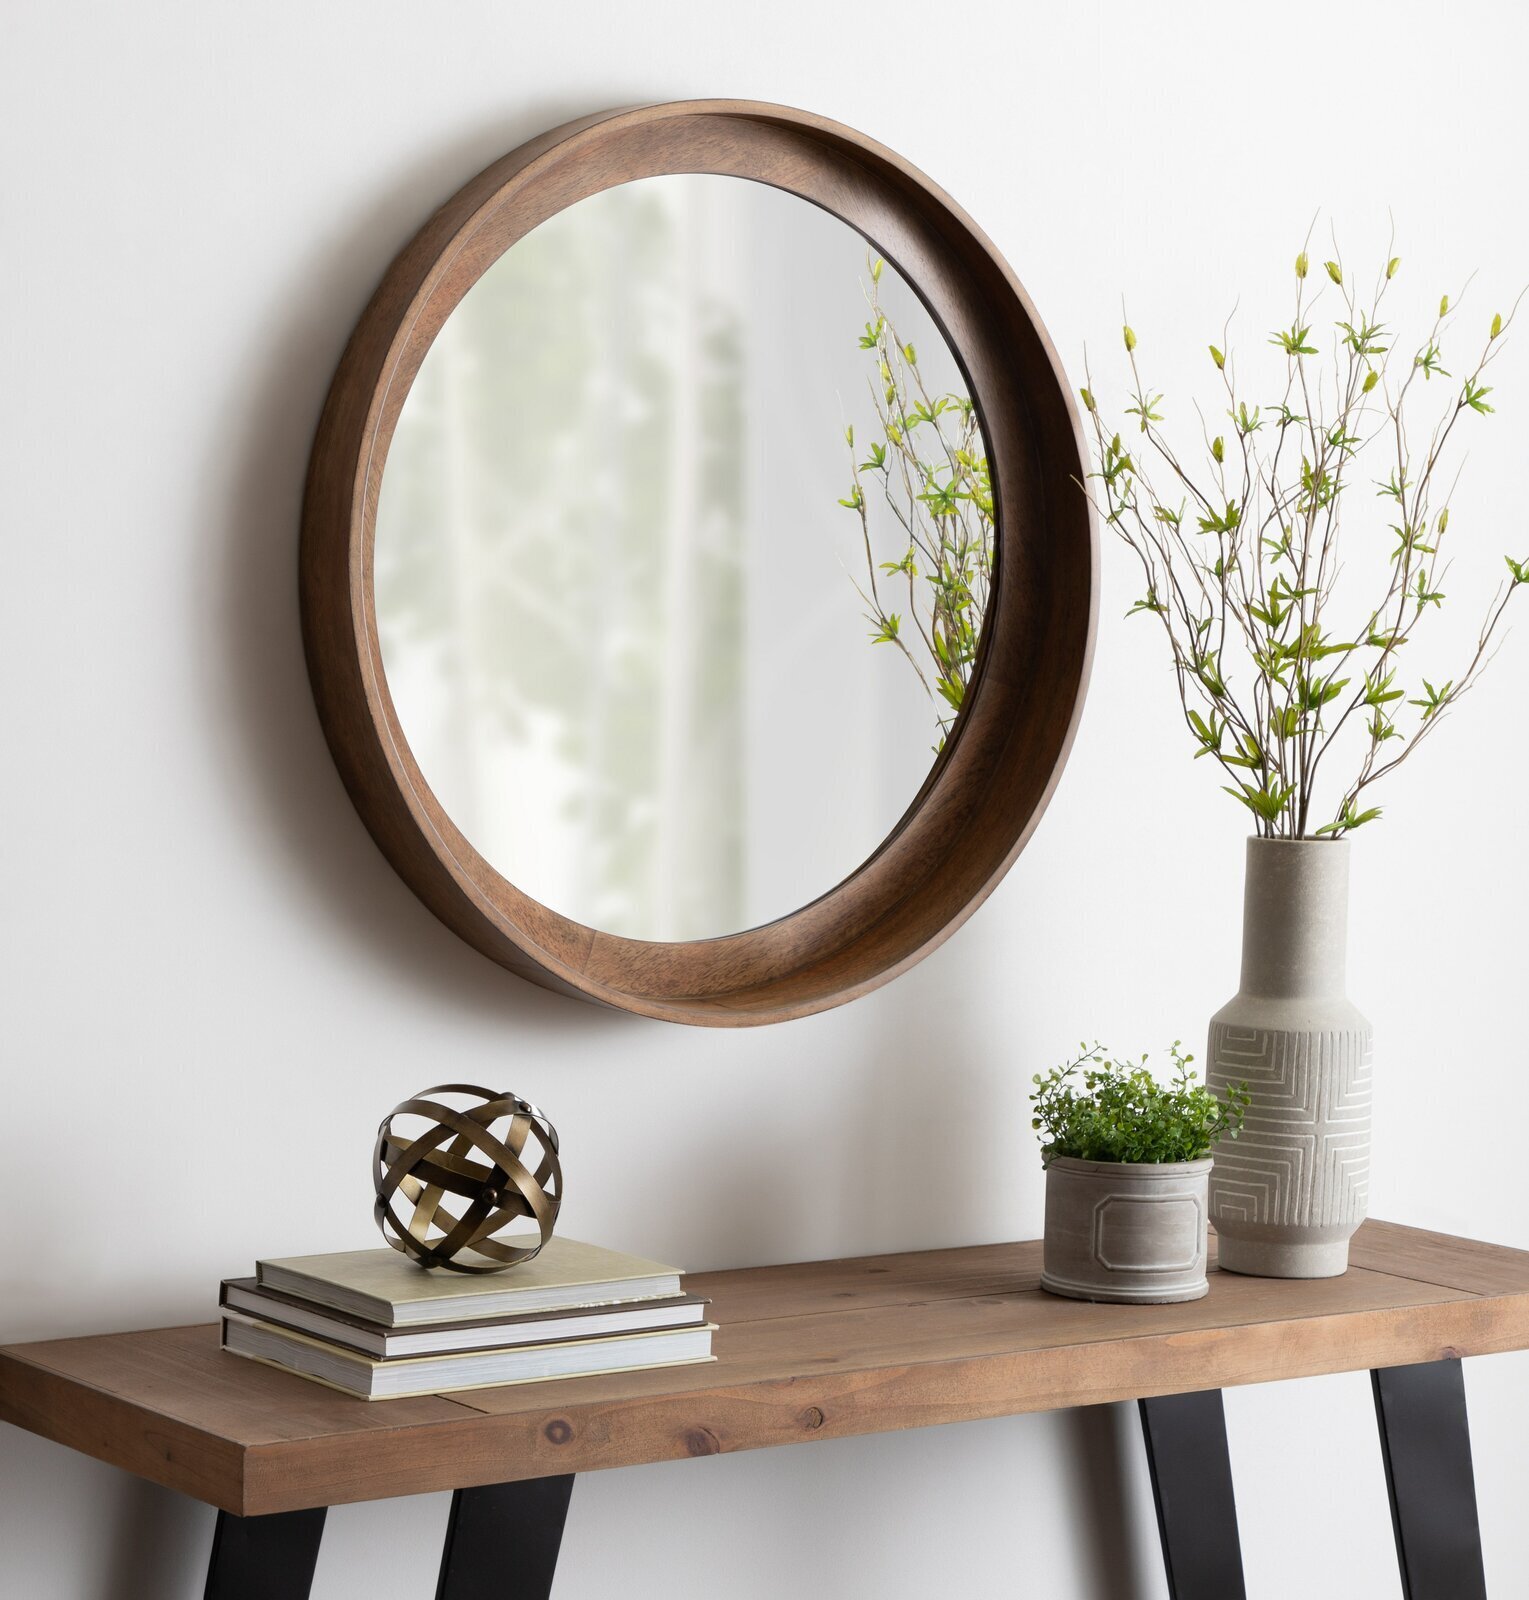 Round mirror frame made of wood